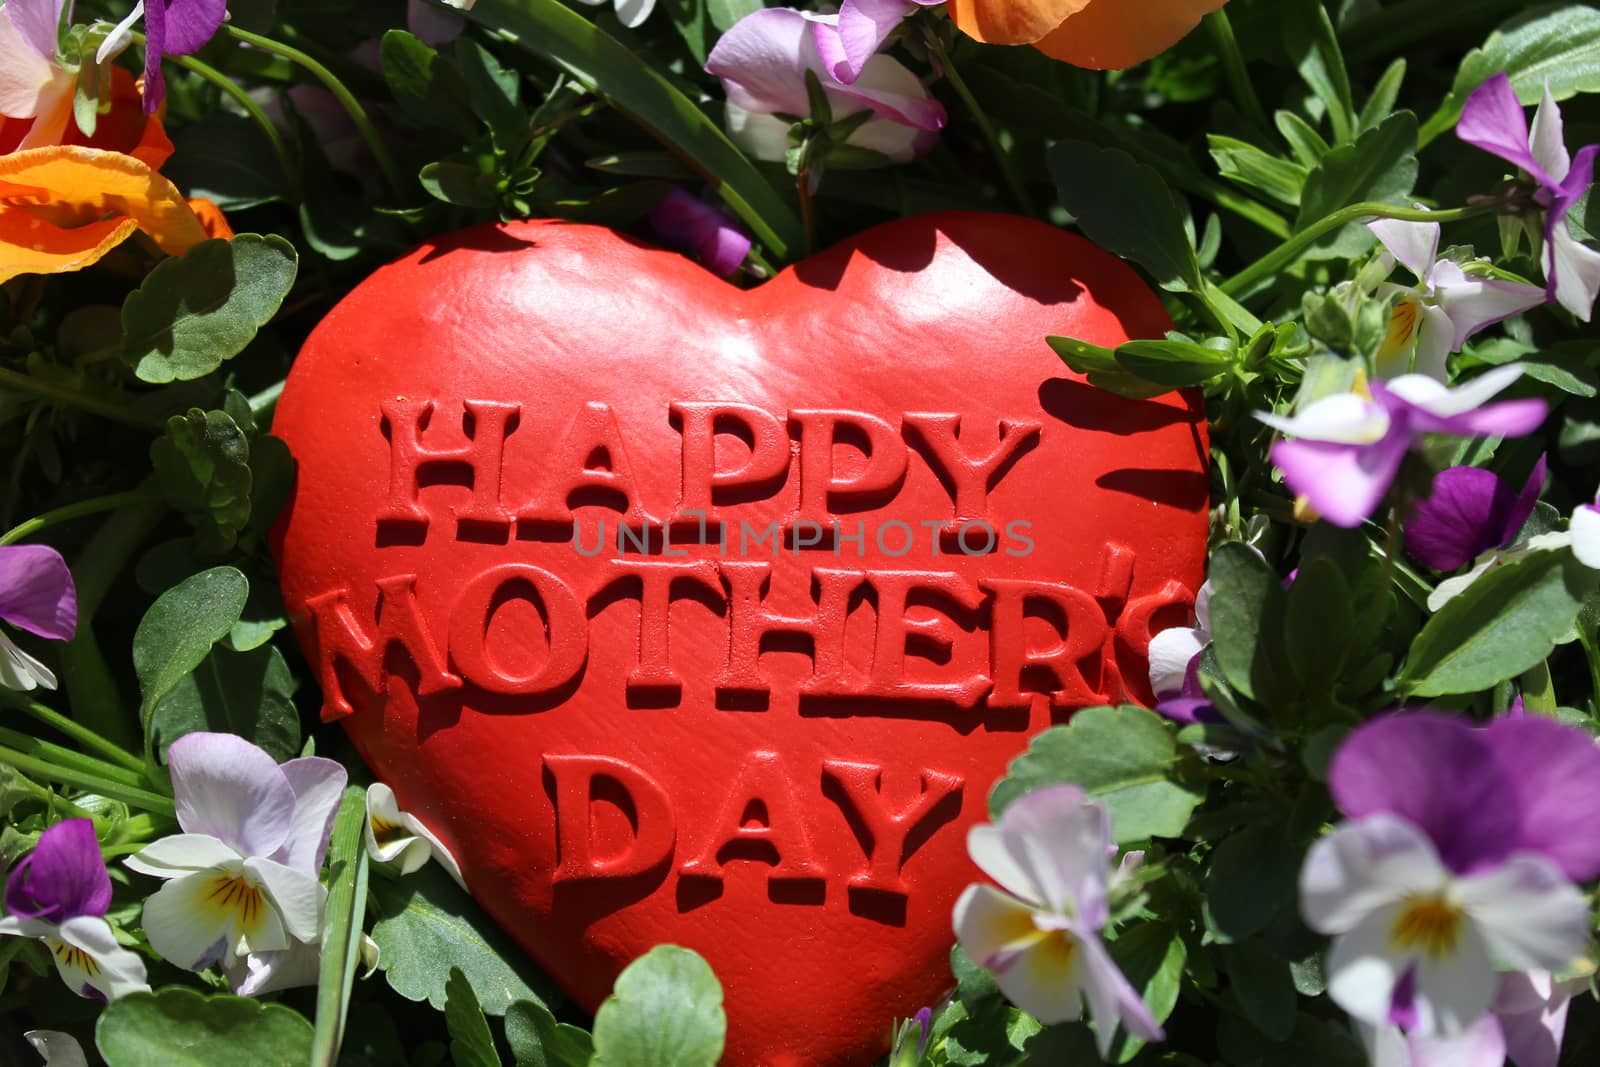 The picture shows a happy mother`s day decoration in flowers.